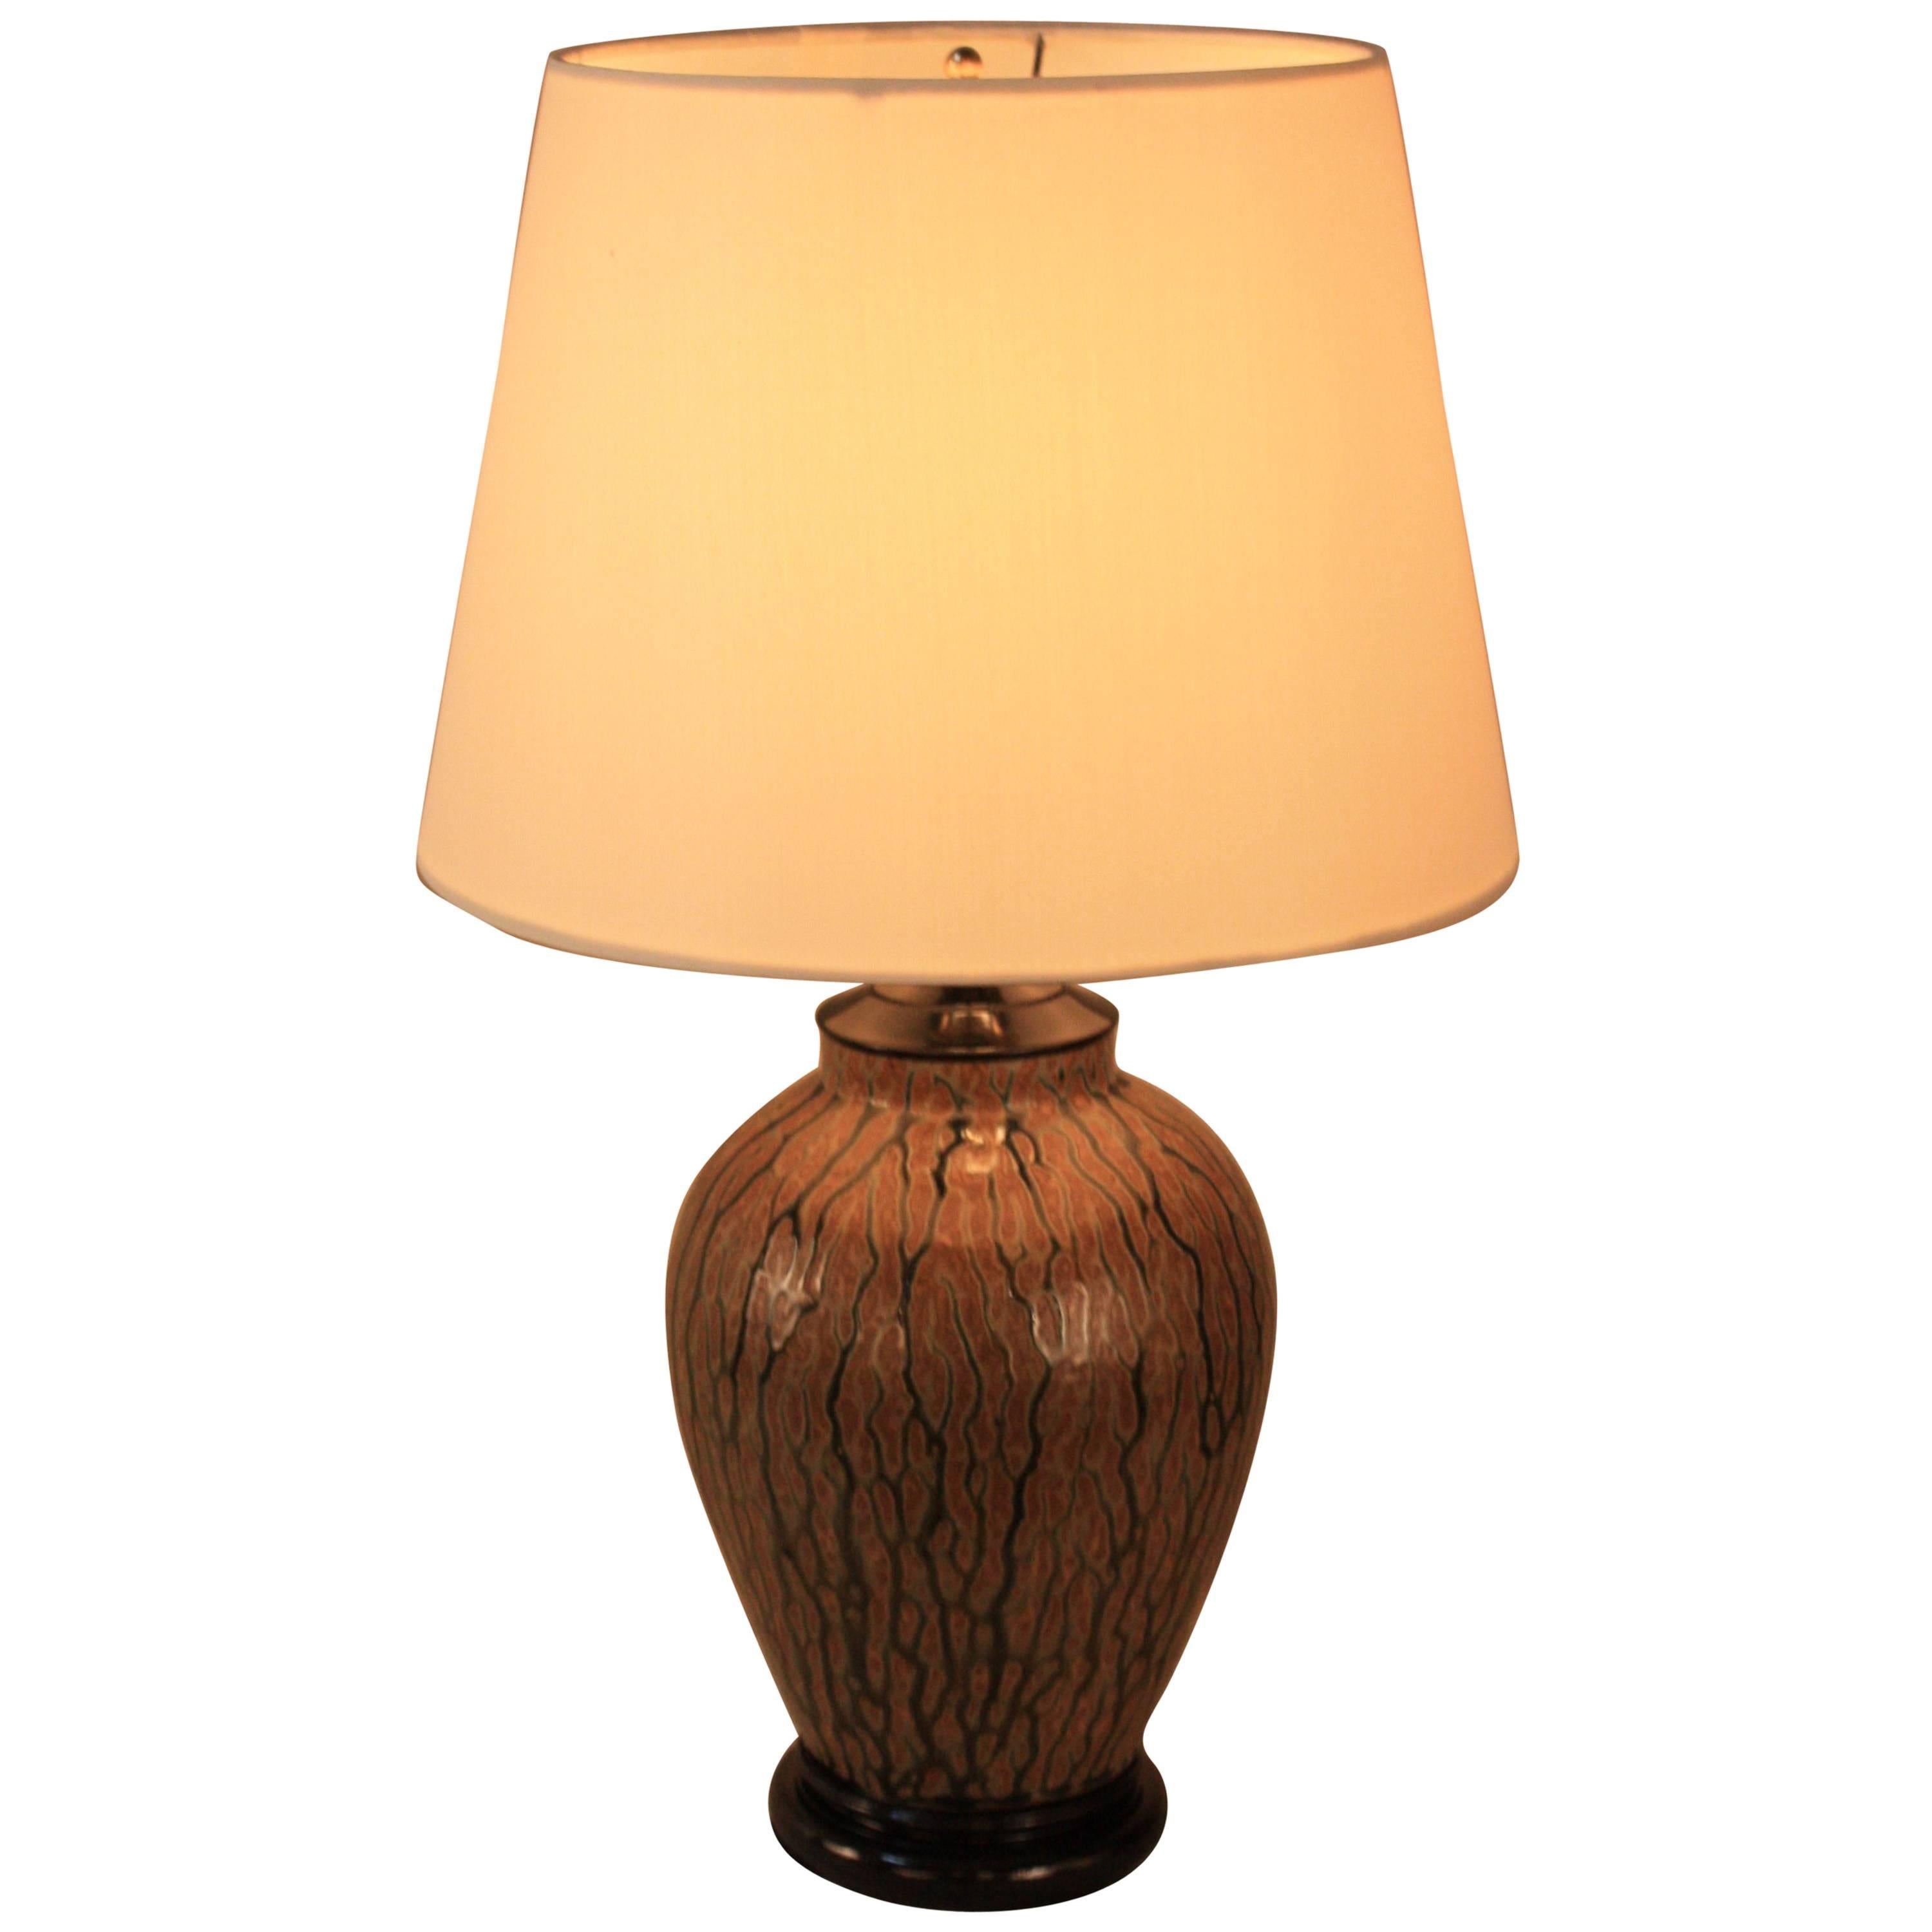 Hand-Painted French Pottery Table Lamp